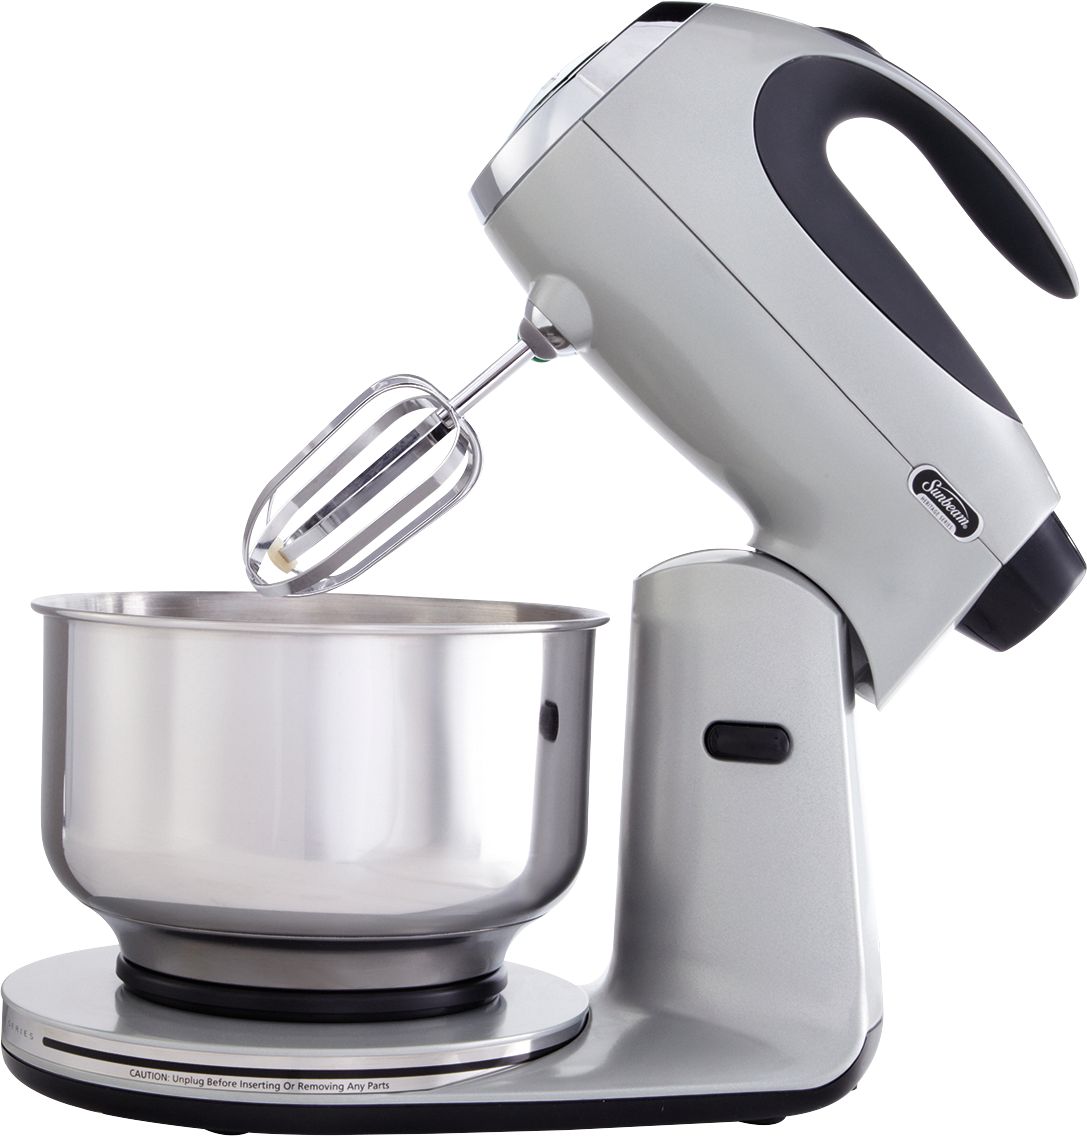 Sunbeam MixMaster Heritage Series Stand Mixer Review and Demo